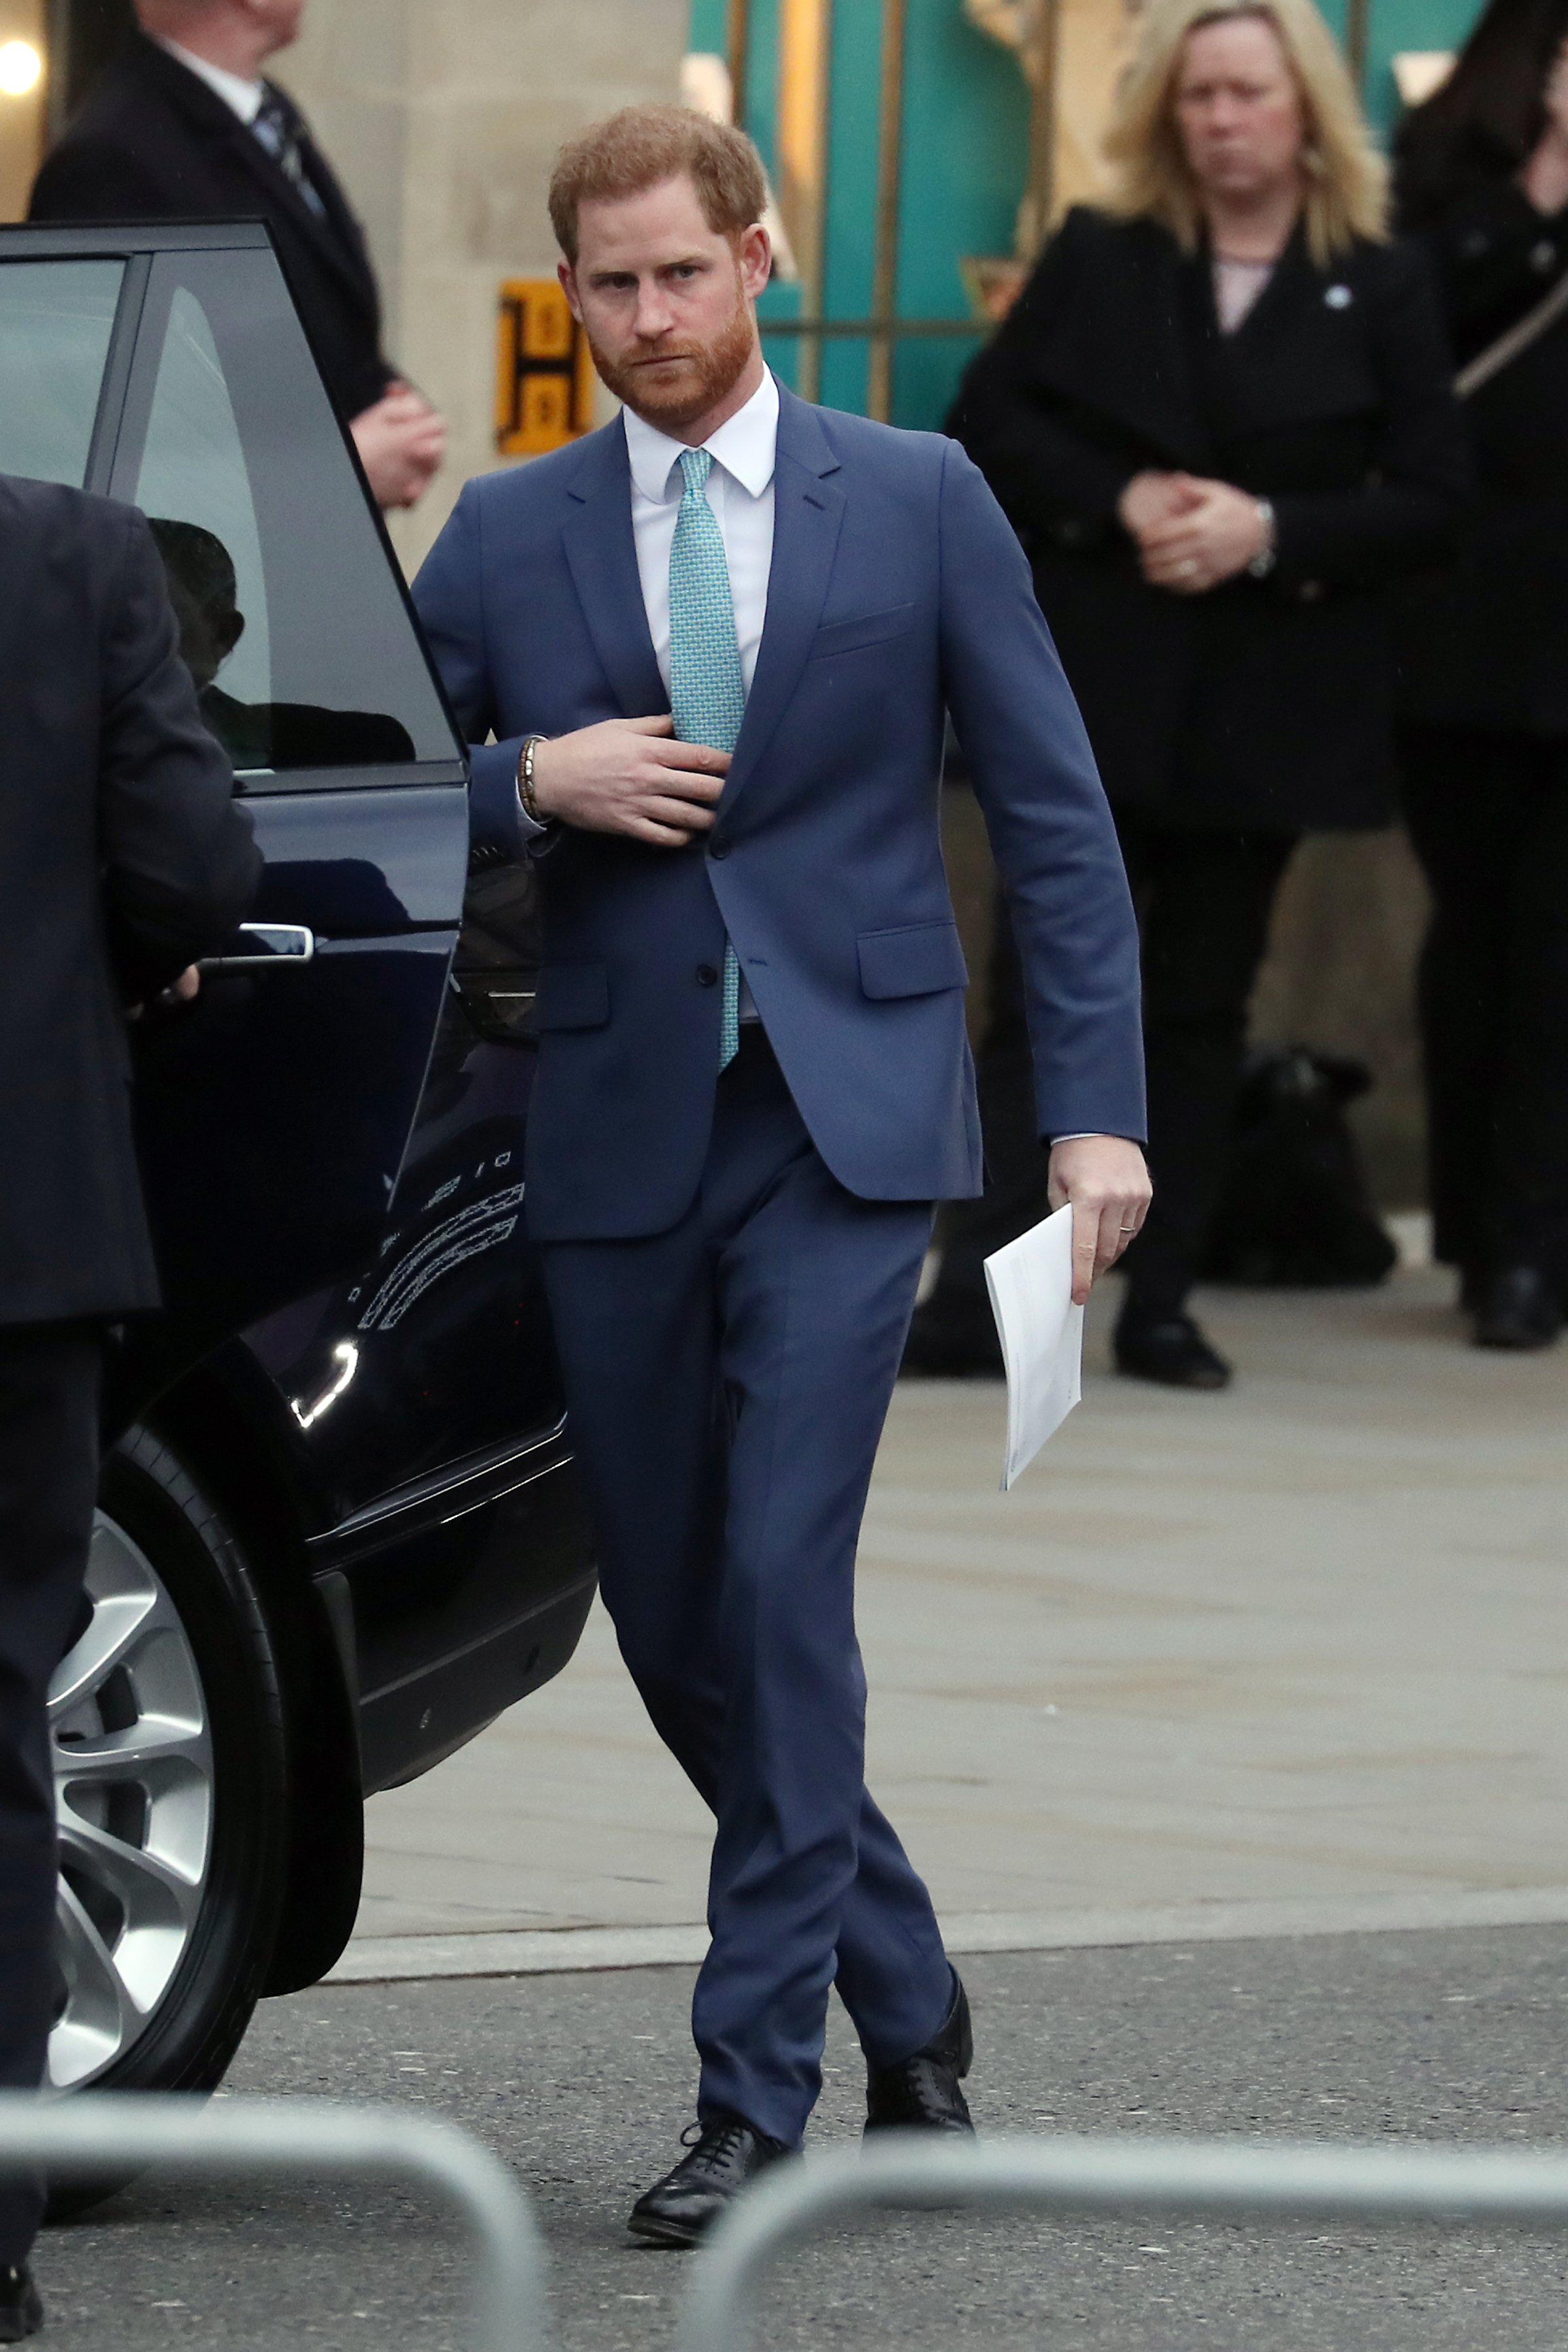 Prince Harry, Duke of Sussex attends the Commonwealth Day Service 2020 on March 09, 2020 in London, England | Photo: Getty Images